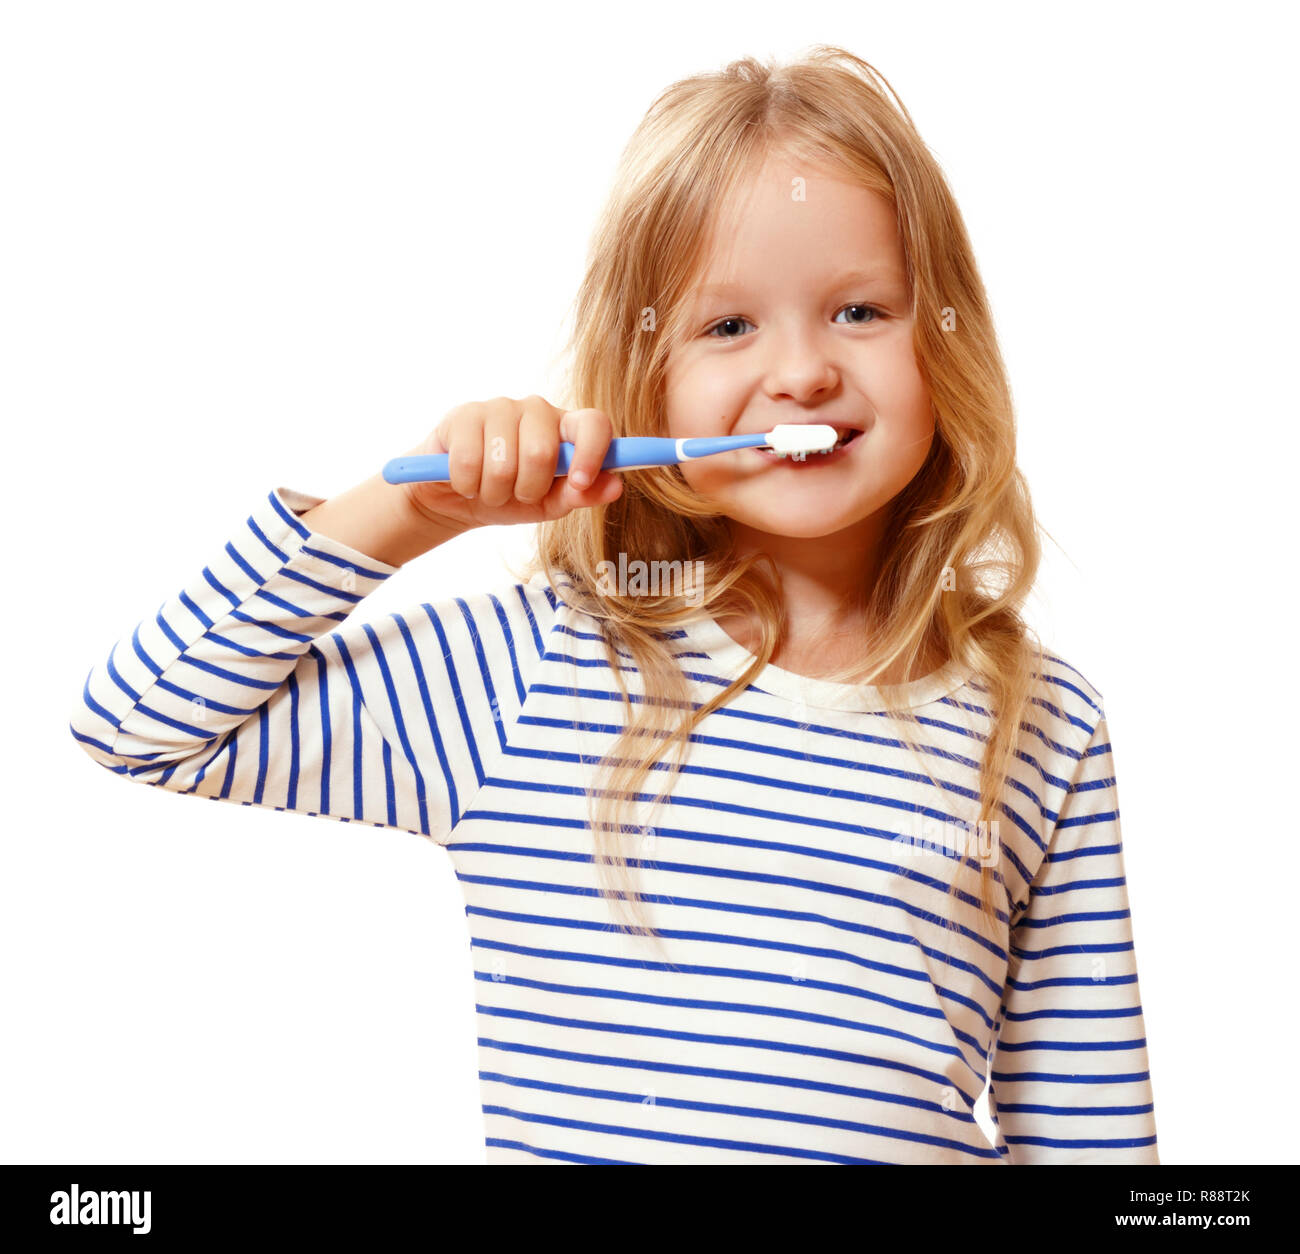 A little girl in striped pajamas is brushing her teeth with a toothbrush. The concept of daily hygiene. Isolated on white background Stock Photo